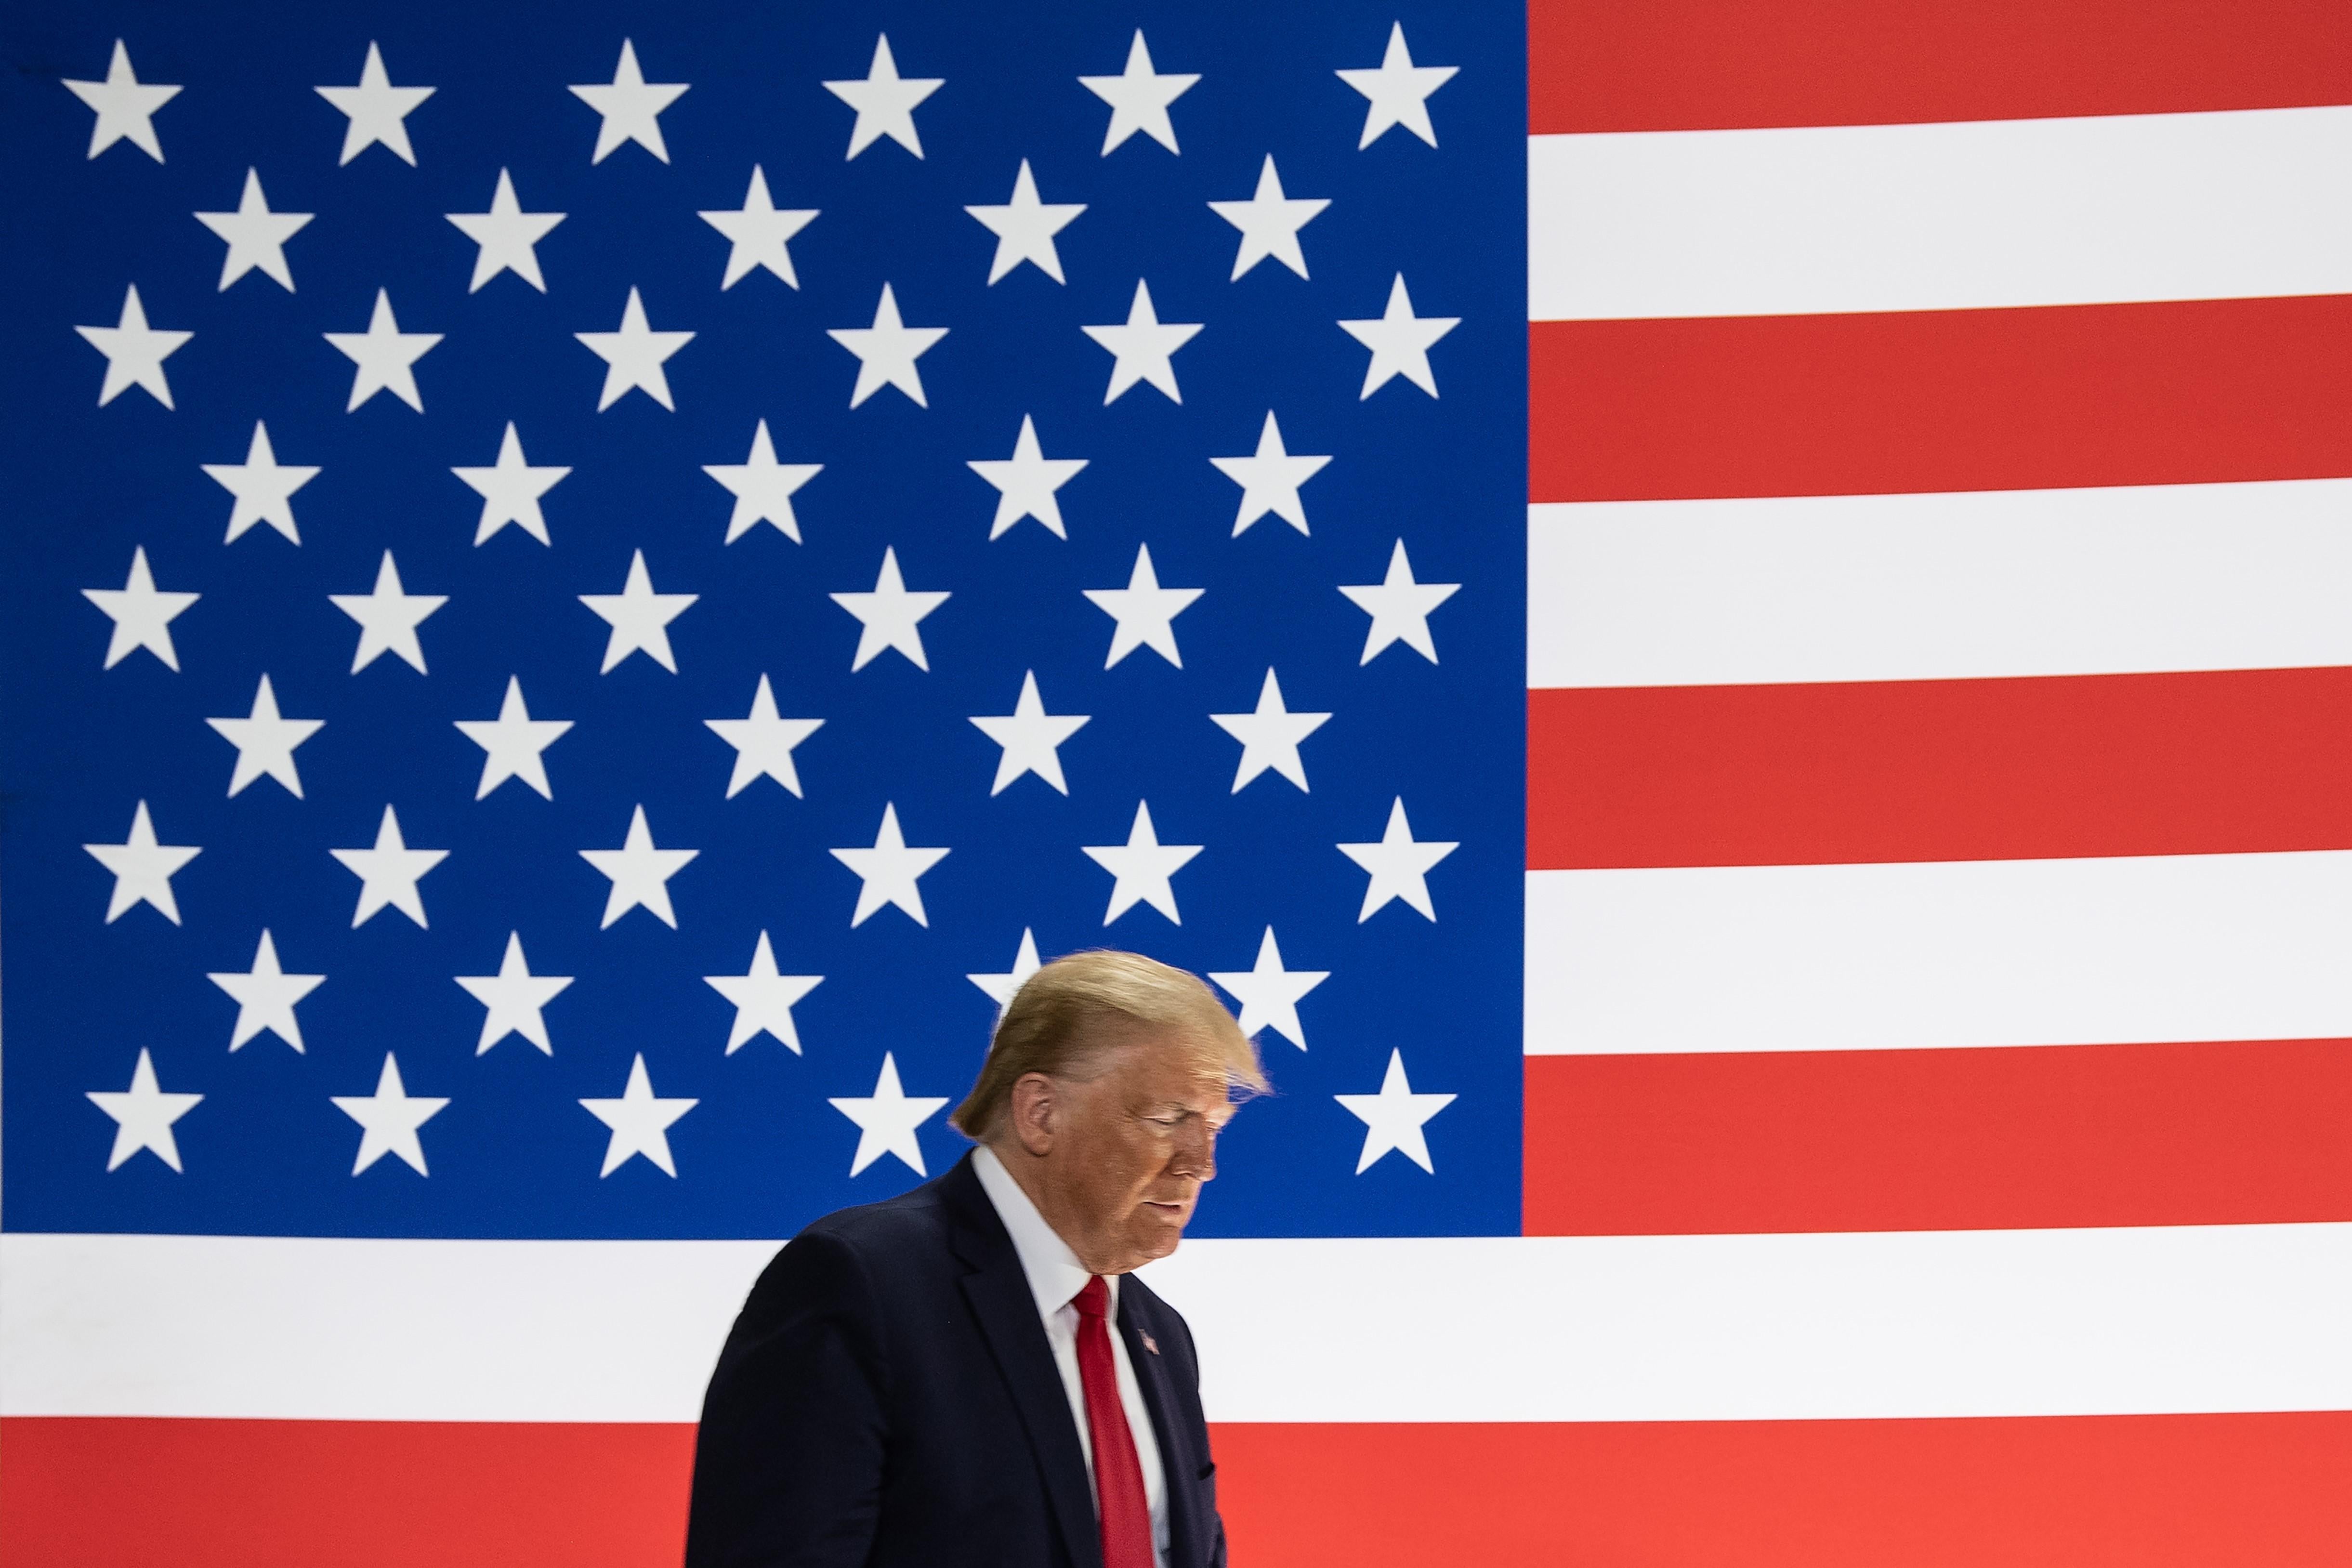 President Donald Trump walks in front of a giant American flag